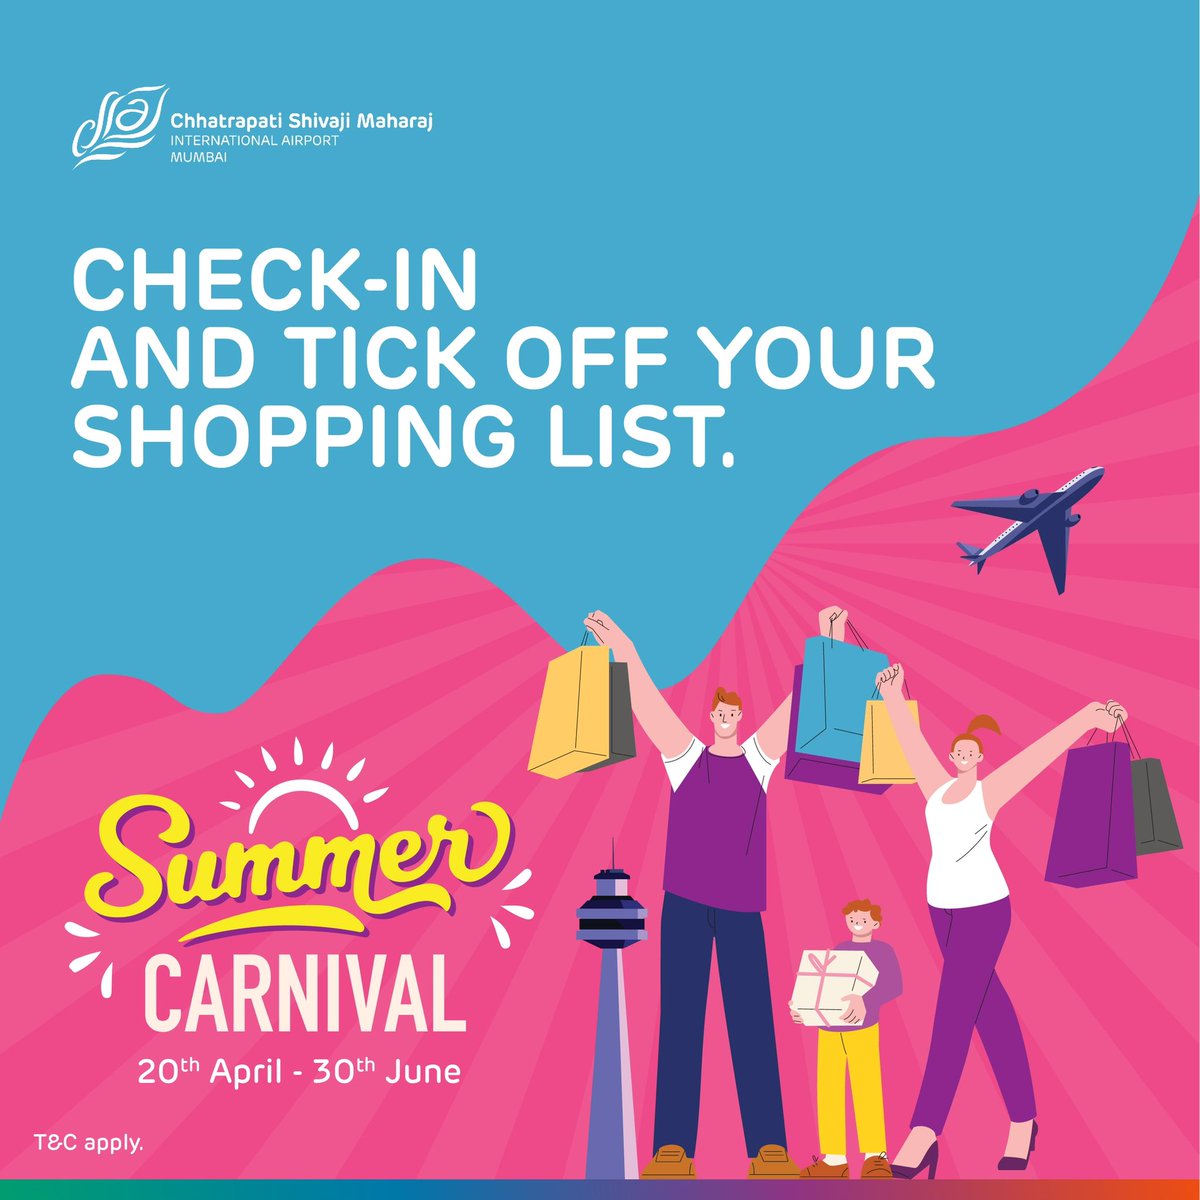 Fly into a world of exciting deals and discounts at our Summer Carnival. So, pack light and shop heavy! #MumbaiAirport #GatewayToGoodness #CSMIA #SummerCarnival #Offers #Explore #Airport